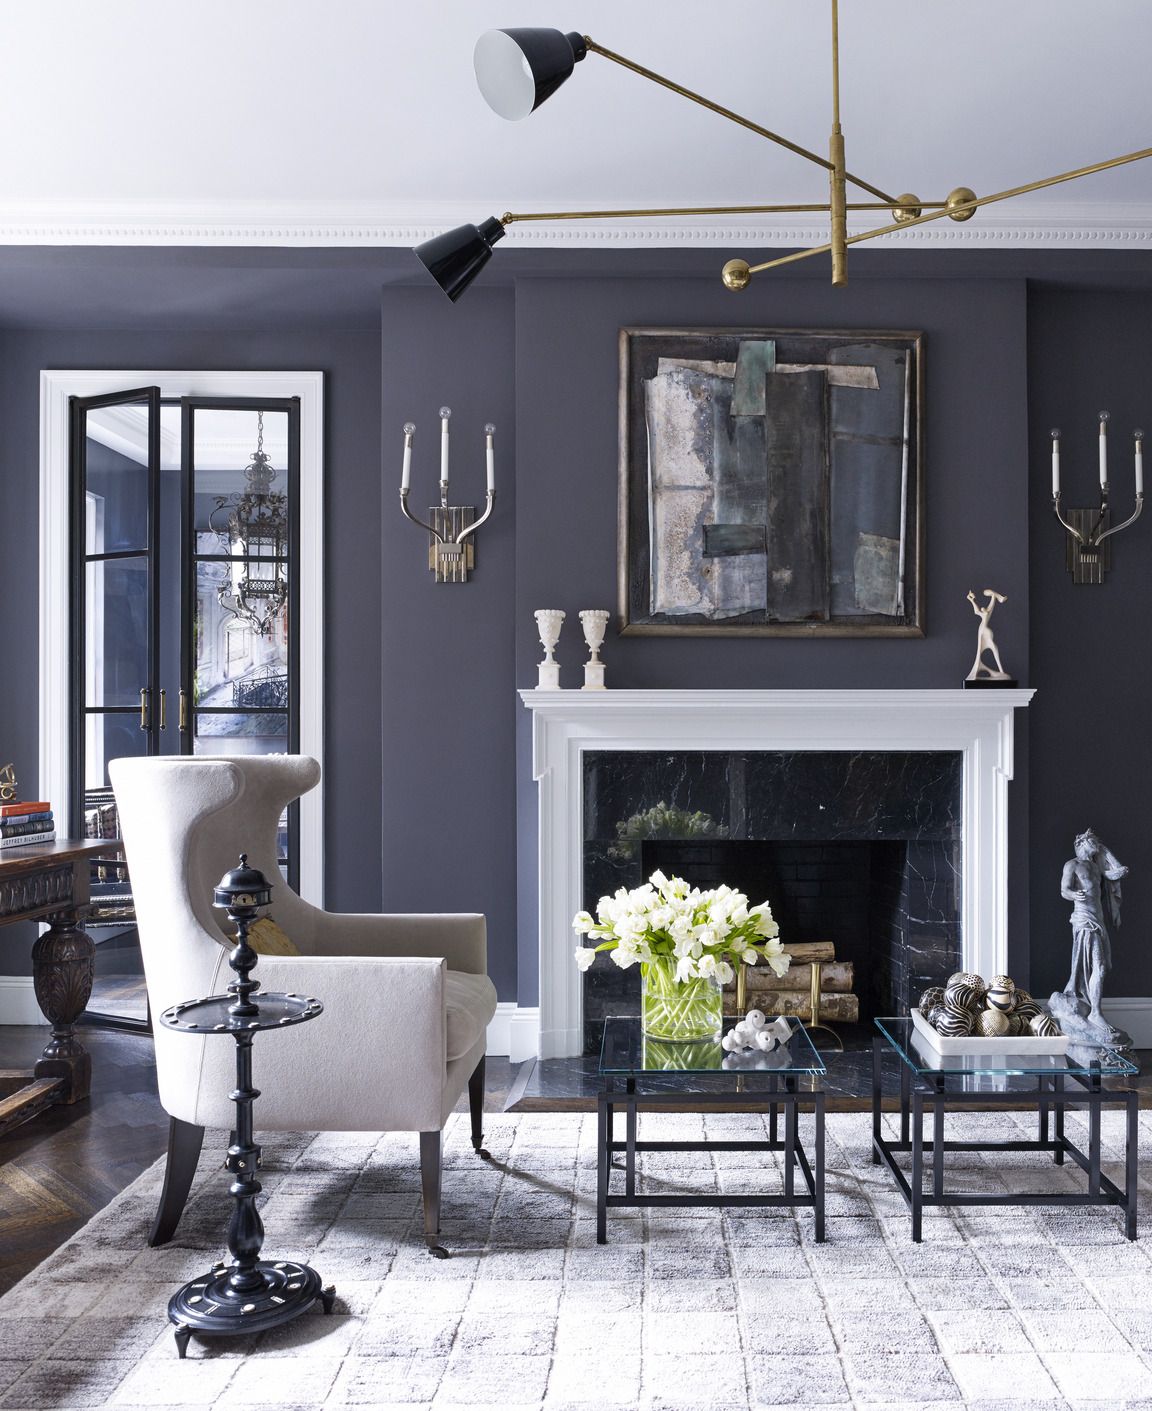 What Colours Go Well With Grey Interiors | Brokeasshome.com